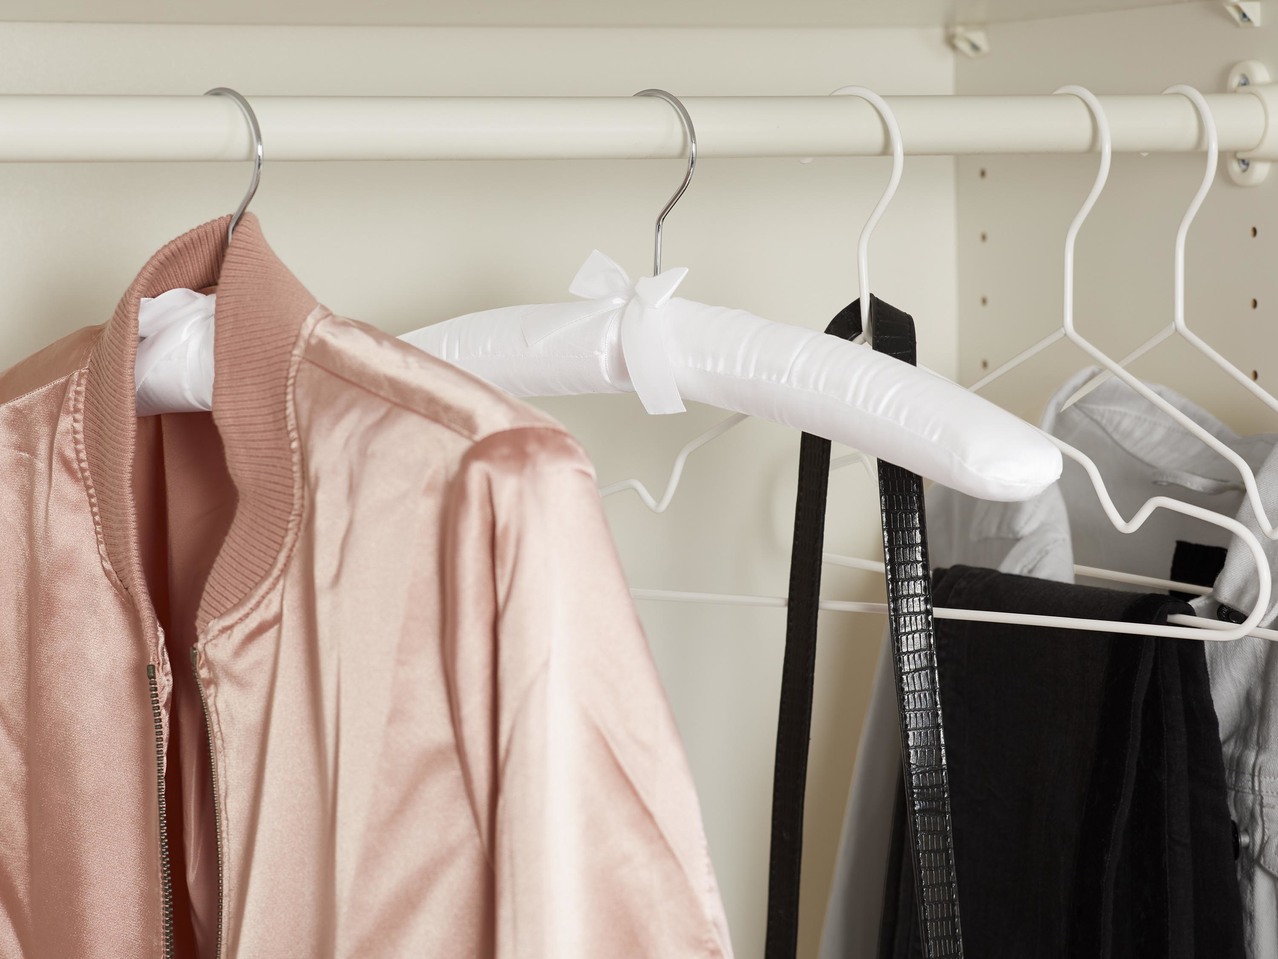 Clothes or Accessory Hangers